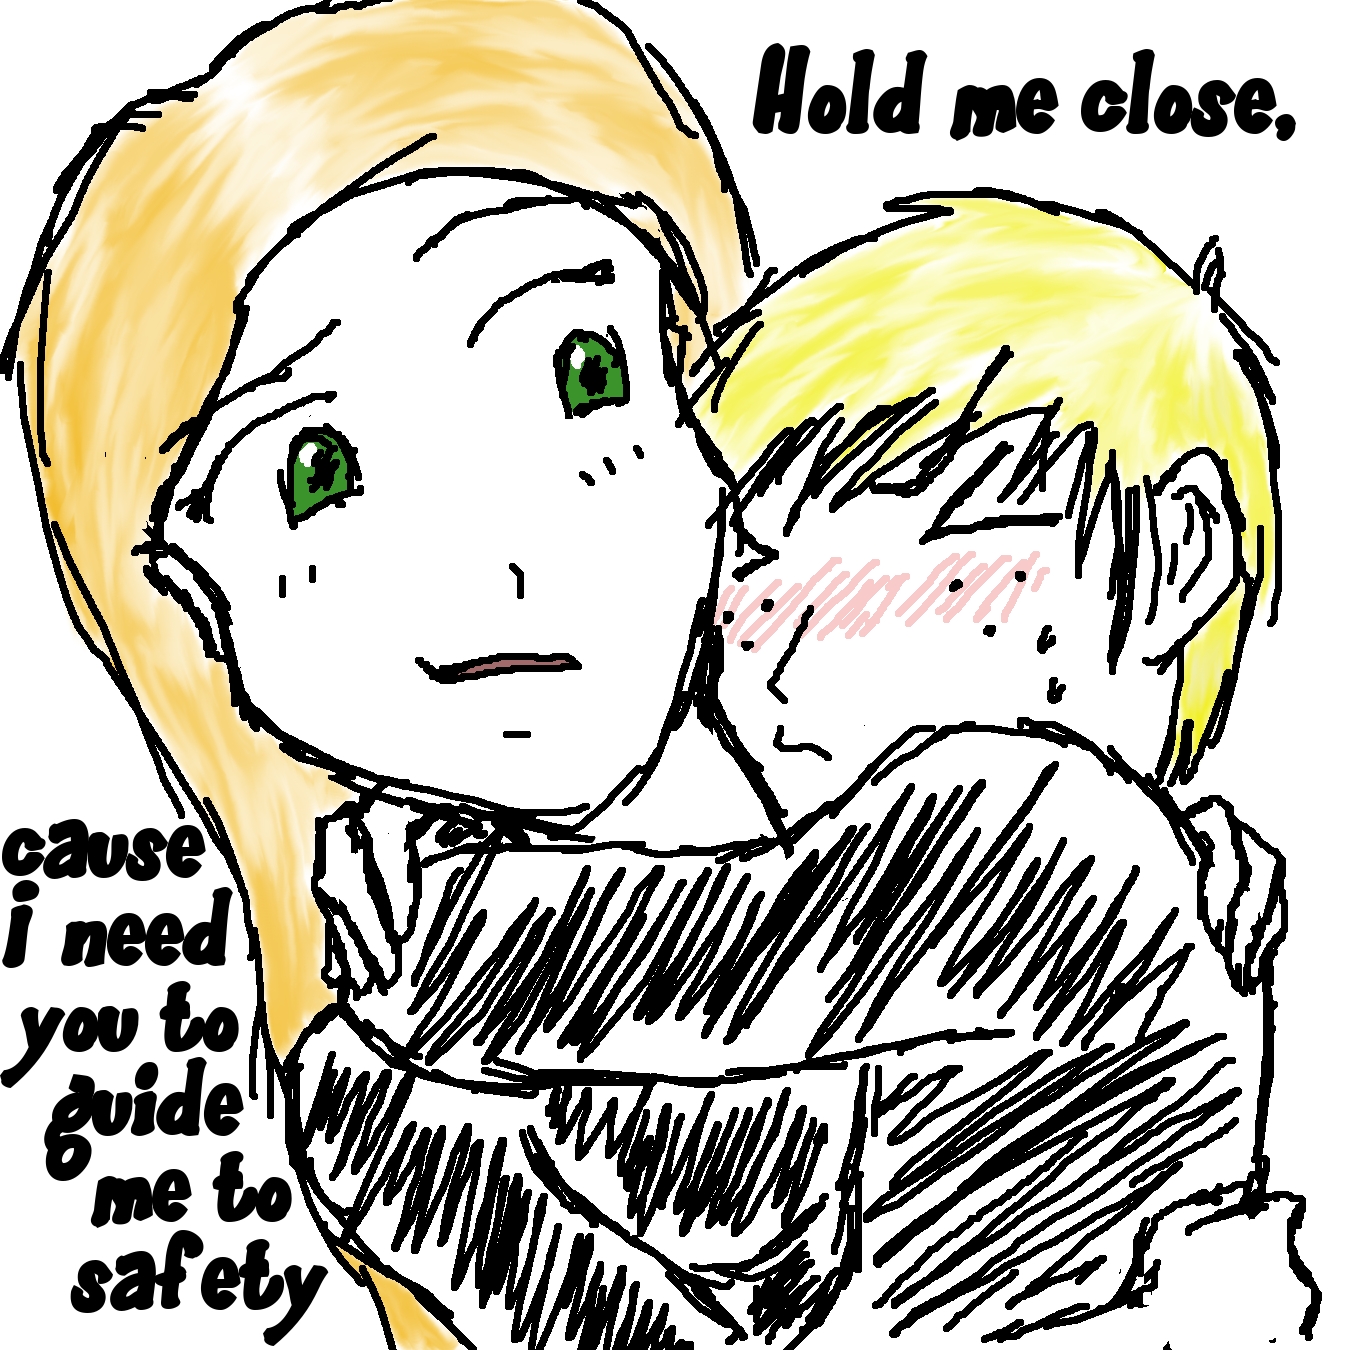 Hold Me Close by PataPata